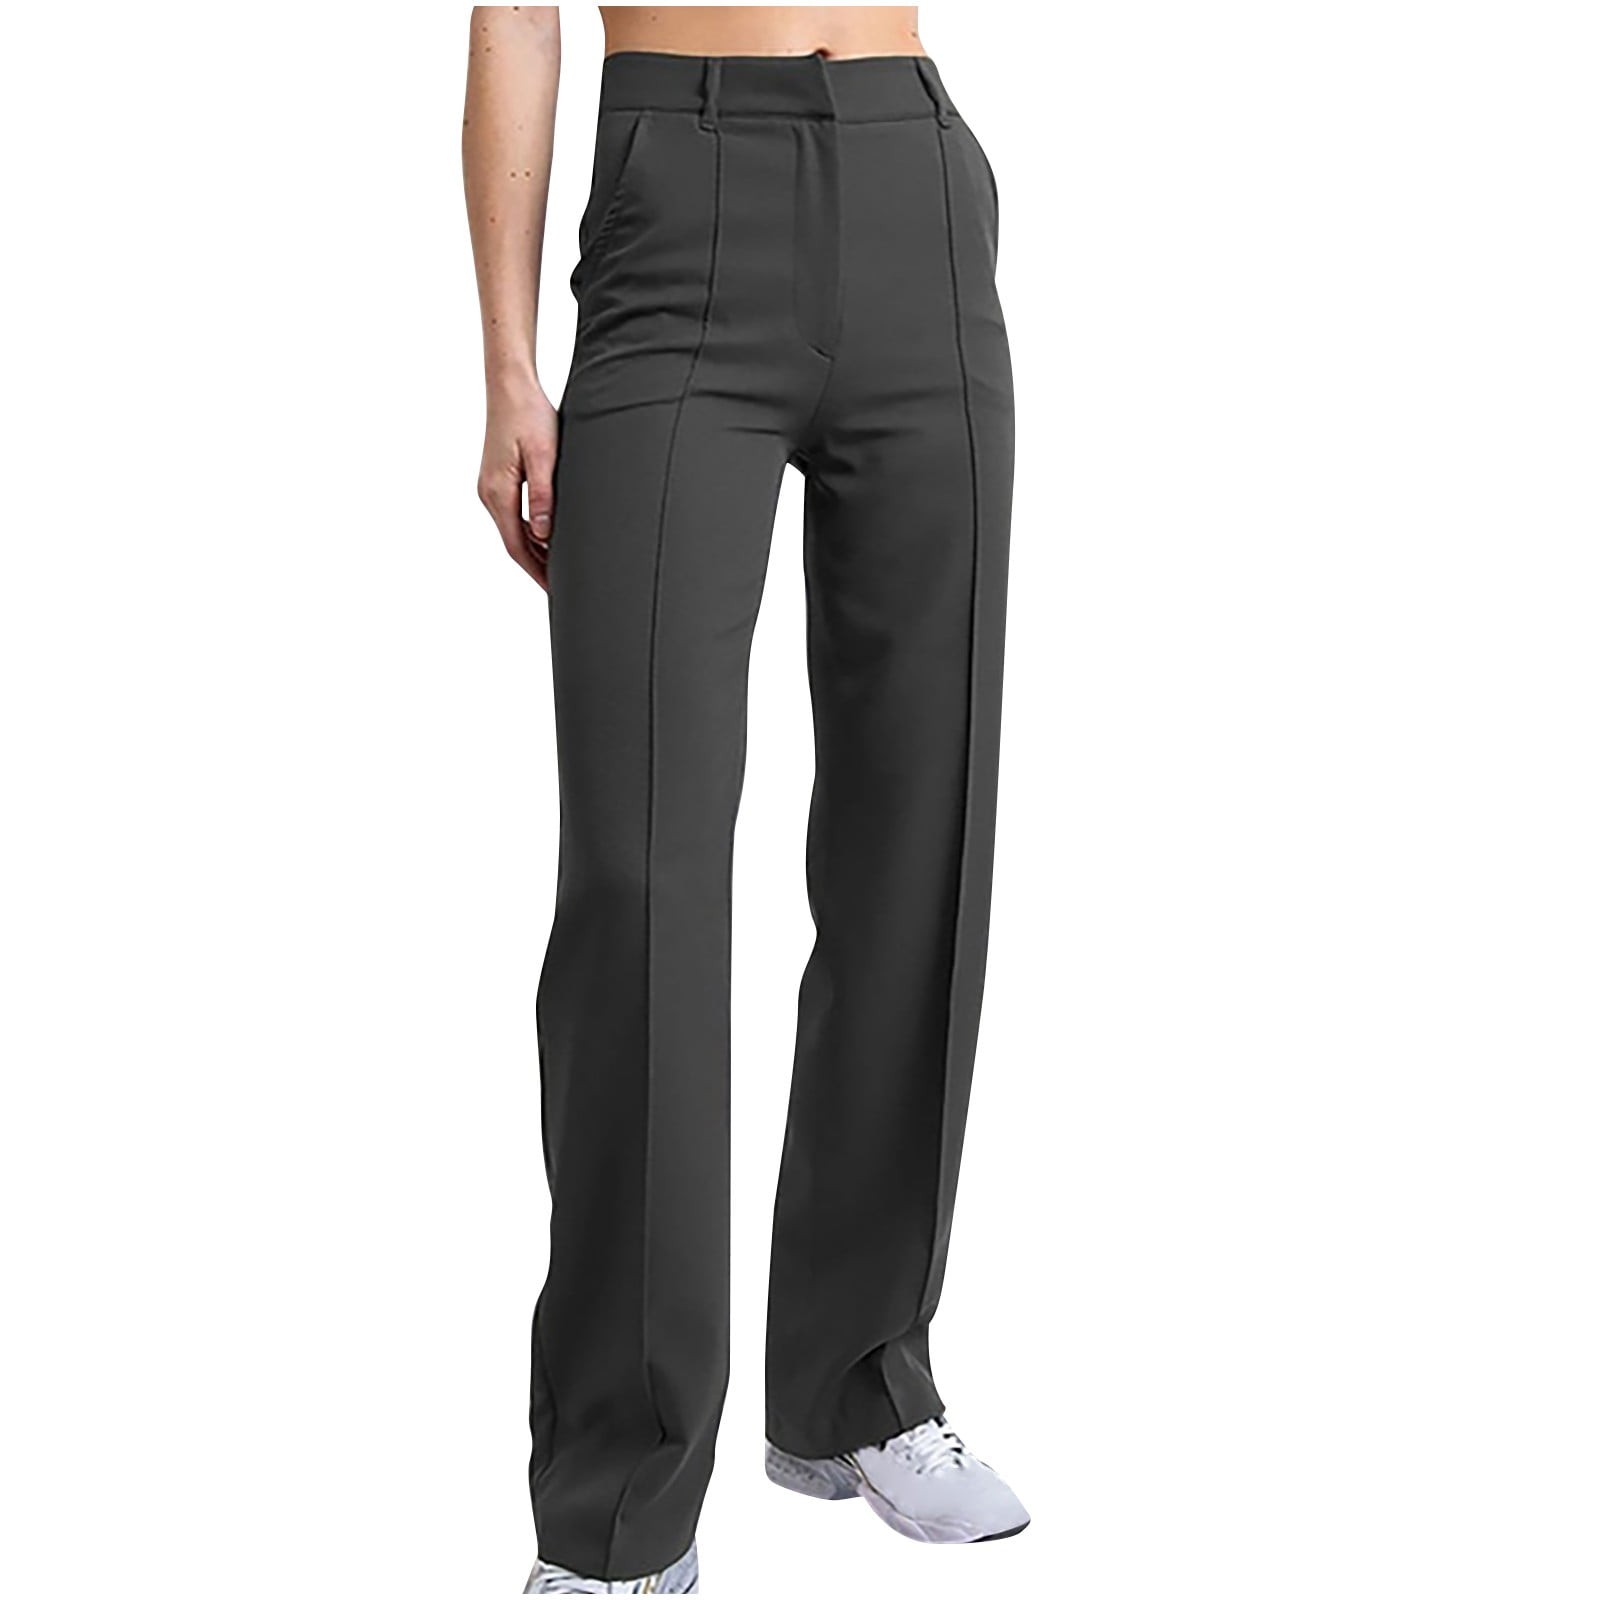 DeHolifer High Waisted Work Pants for Women Business Palestine